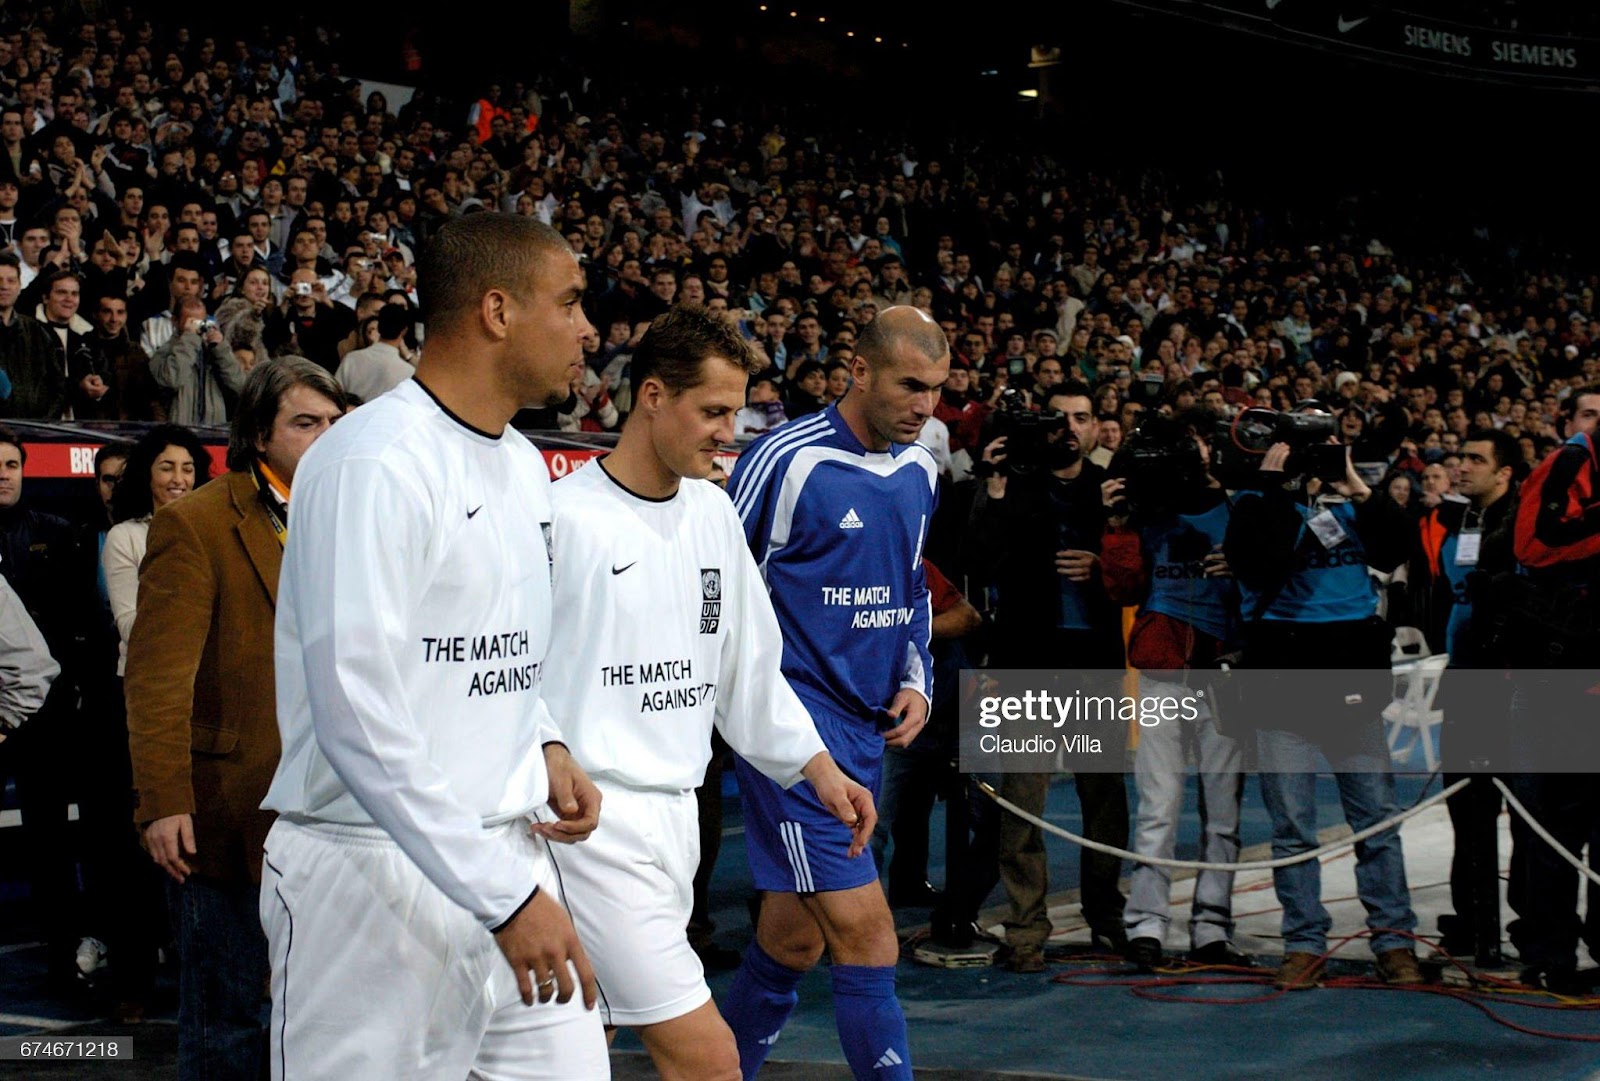 Left to right Ronaldo, Michael Schumacher and Zinedine Zidane during the match against poverty played between Ronaldo & friends and Zidane & friends at 